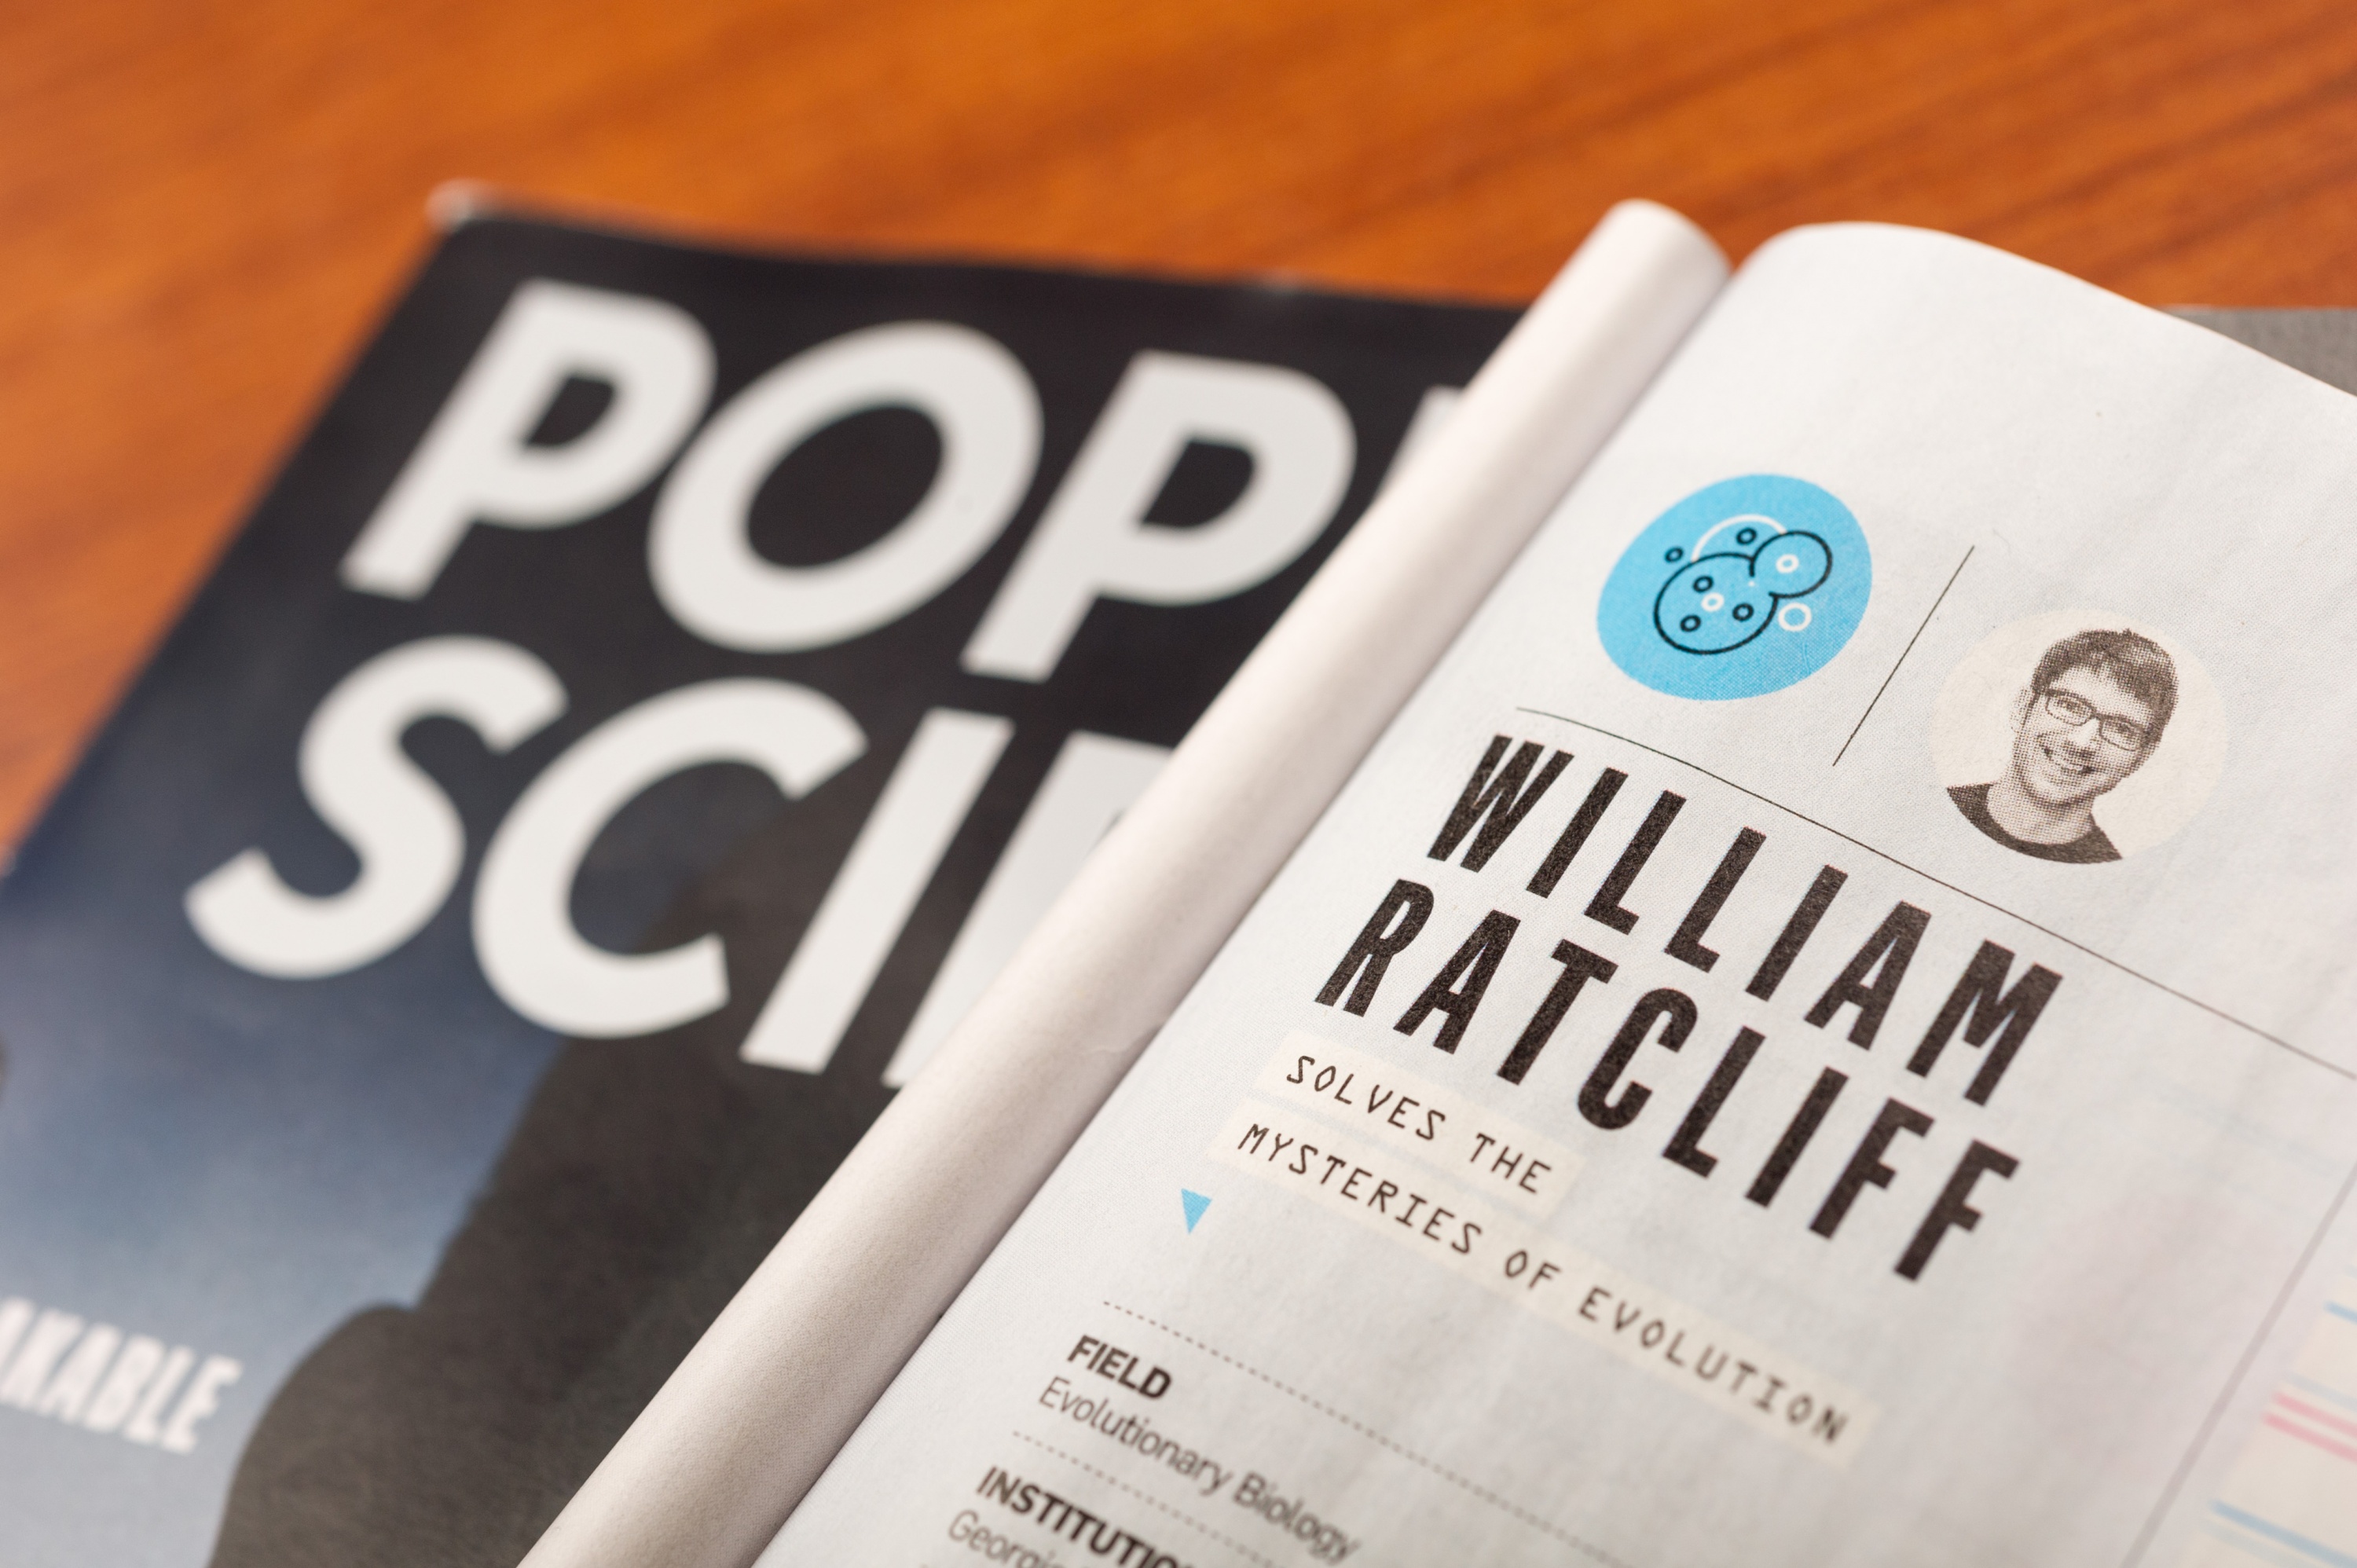 Magazine Popular Science has heaved Georgia Tech researcher William Ratcliff into its annual list "The Brilliant 10." Ratcliff has impressively addressed the question of how single cell organisms evolved into multicellular life.Credit: Rob Felt